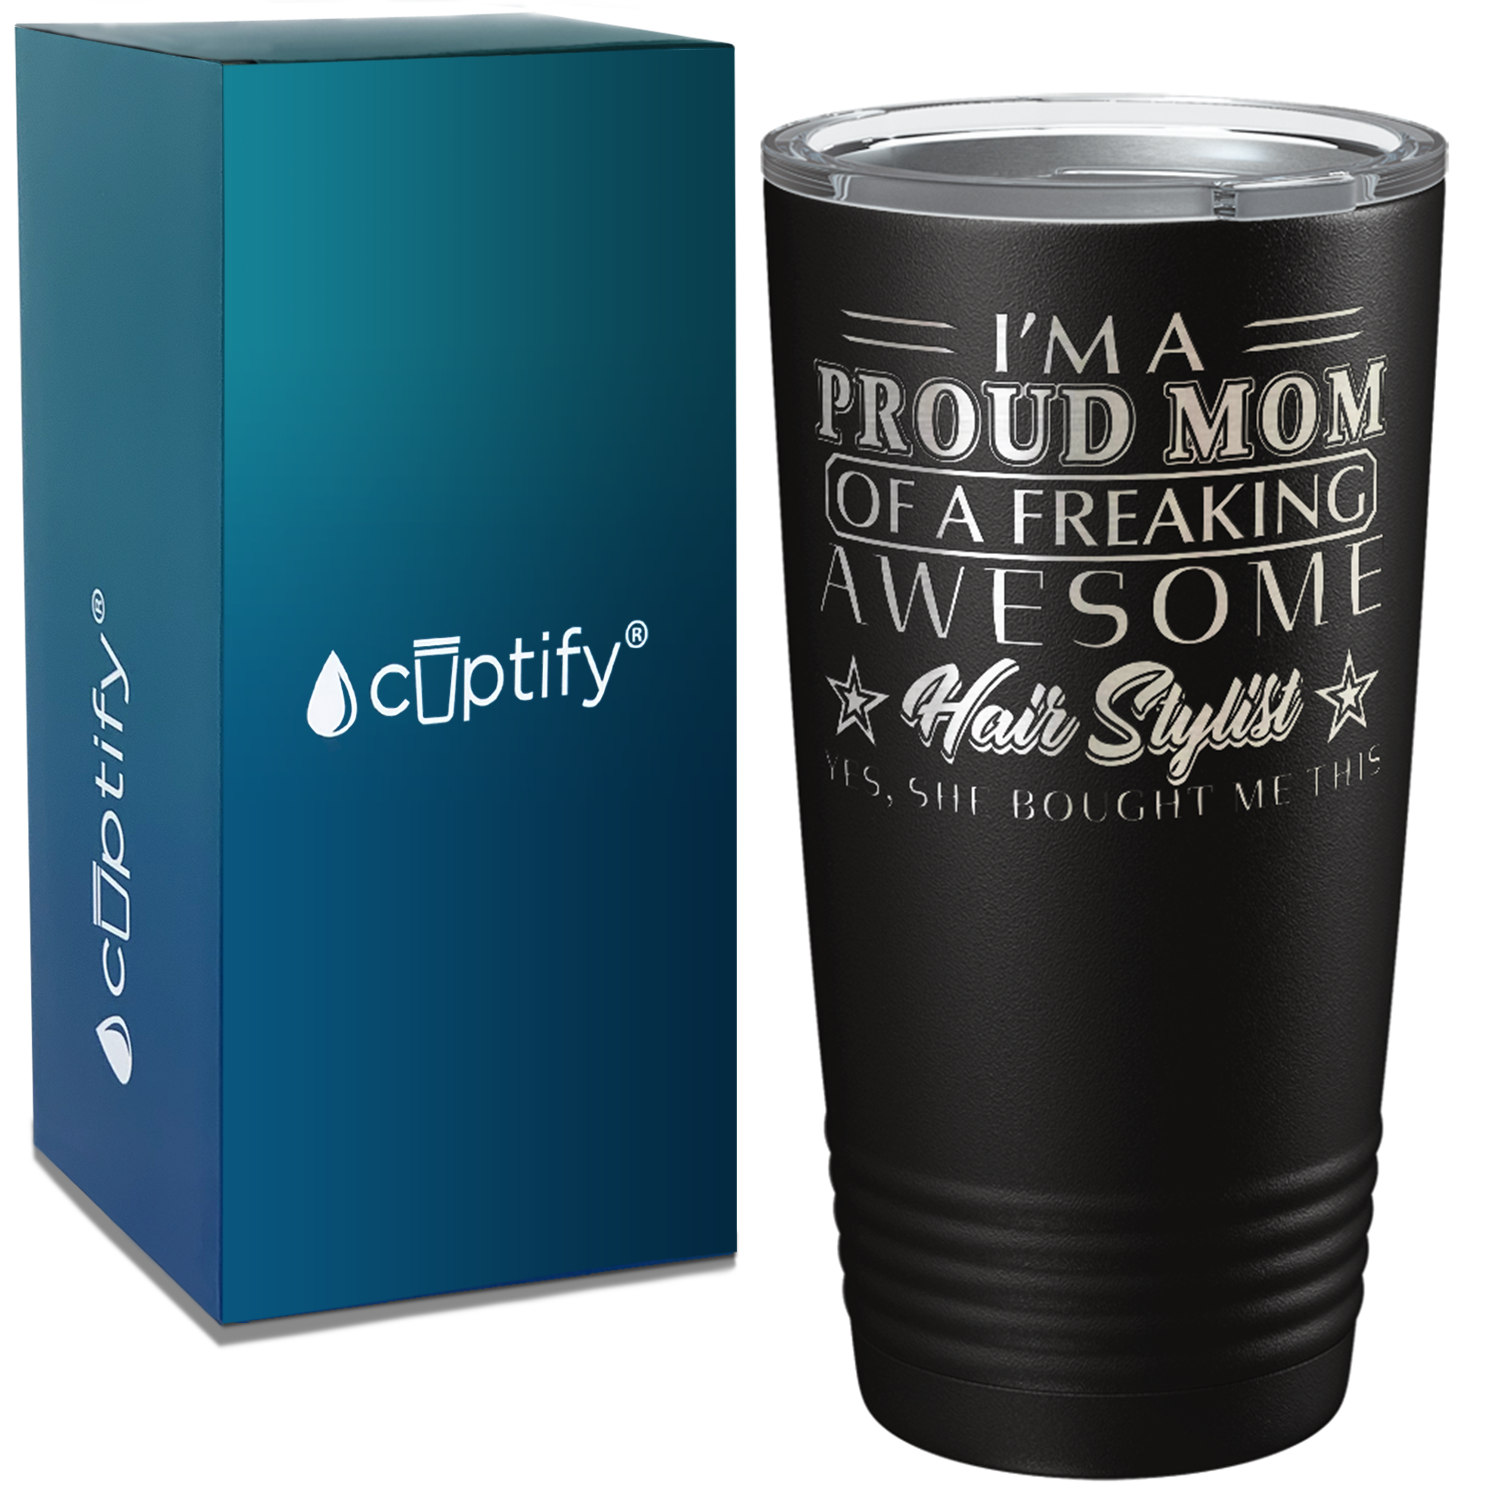 I'm A Proud Mom of a Freaking Awesome HairStylist Laser Engraved on Hairstylist 20oz Tumbler